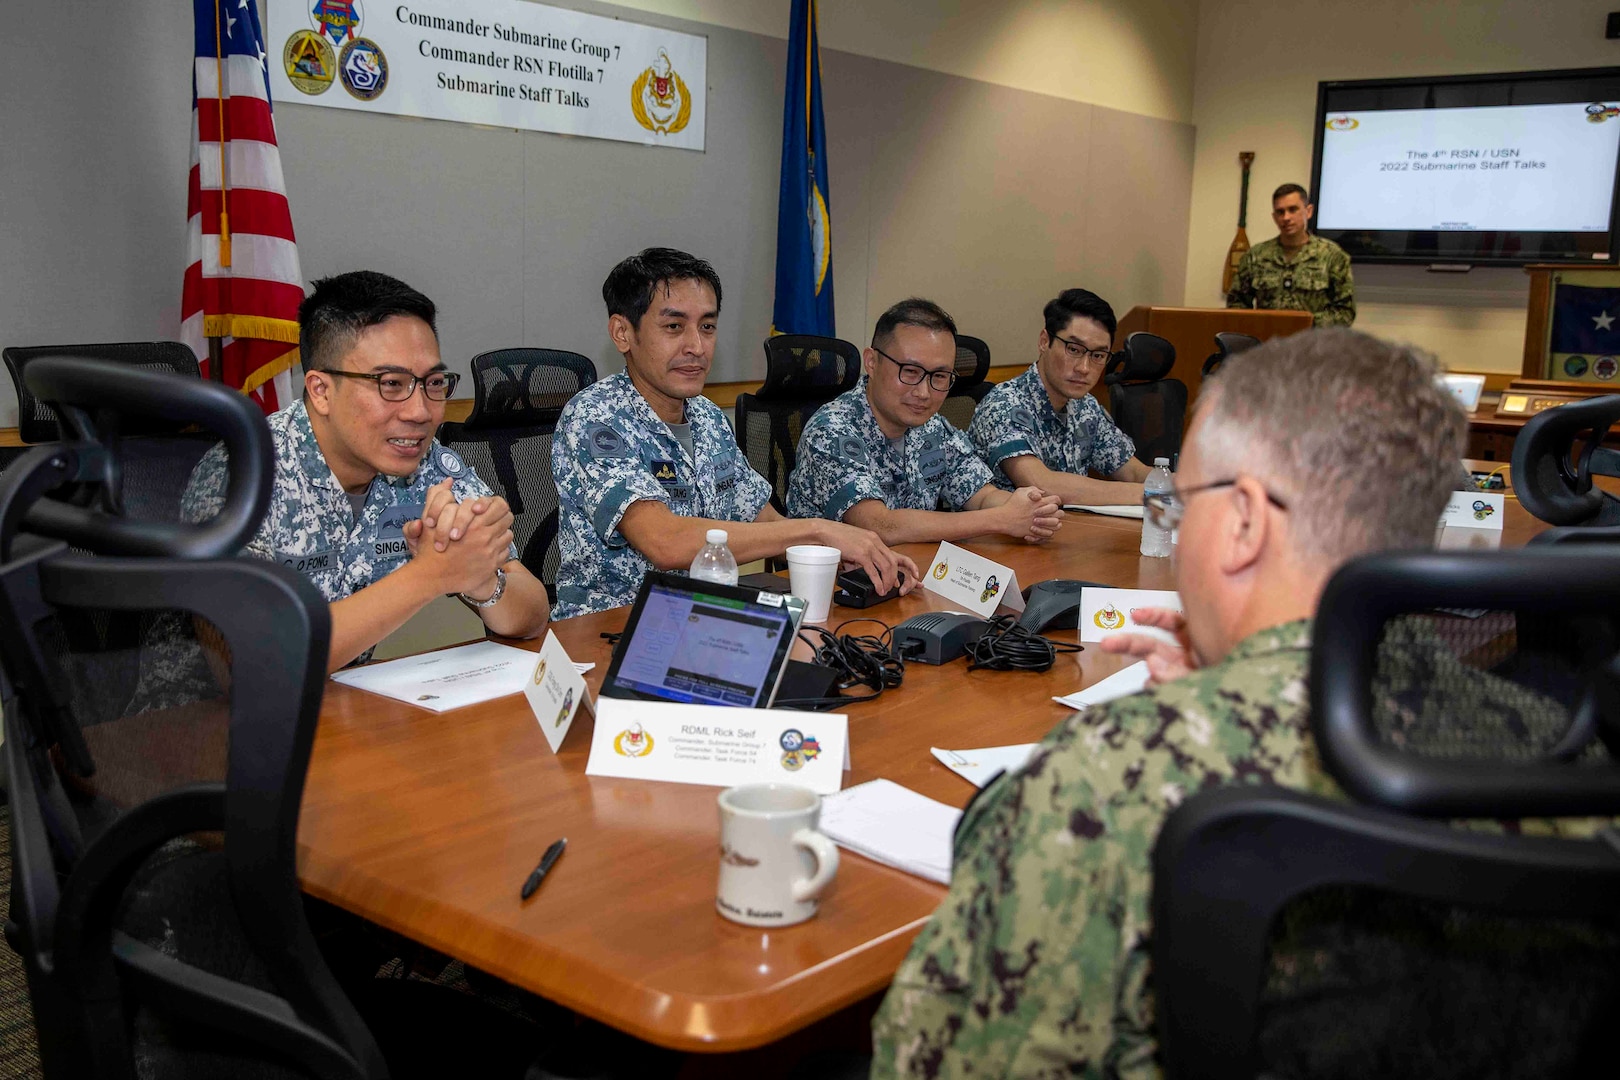 Submarine Staff Talks between U.S. and Republic of Singapore Navy Highlight Interoperability in Indo-Pacific region